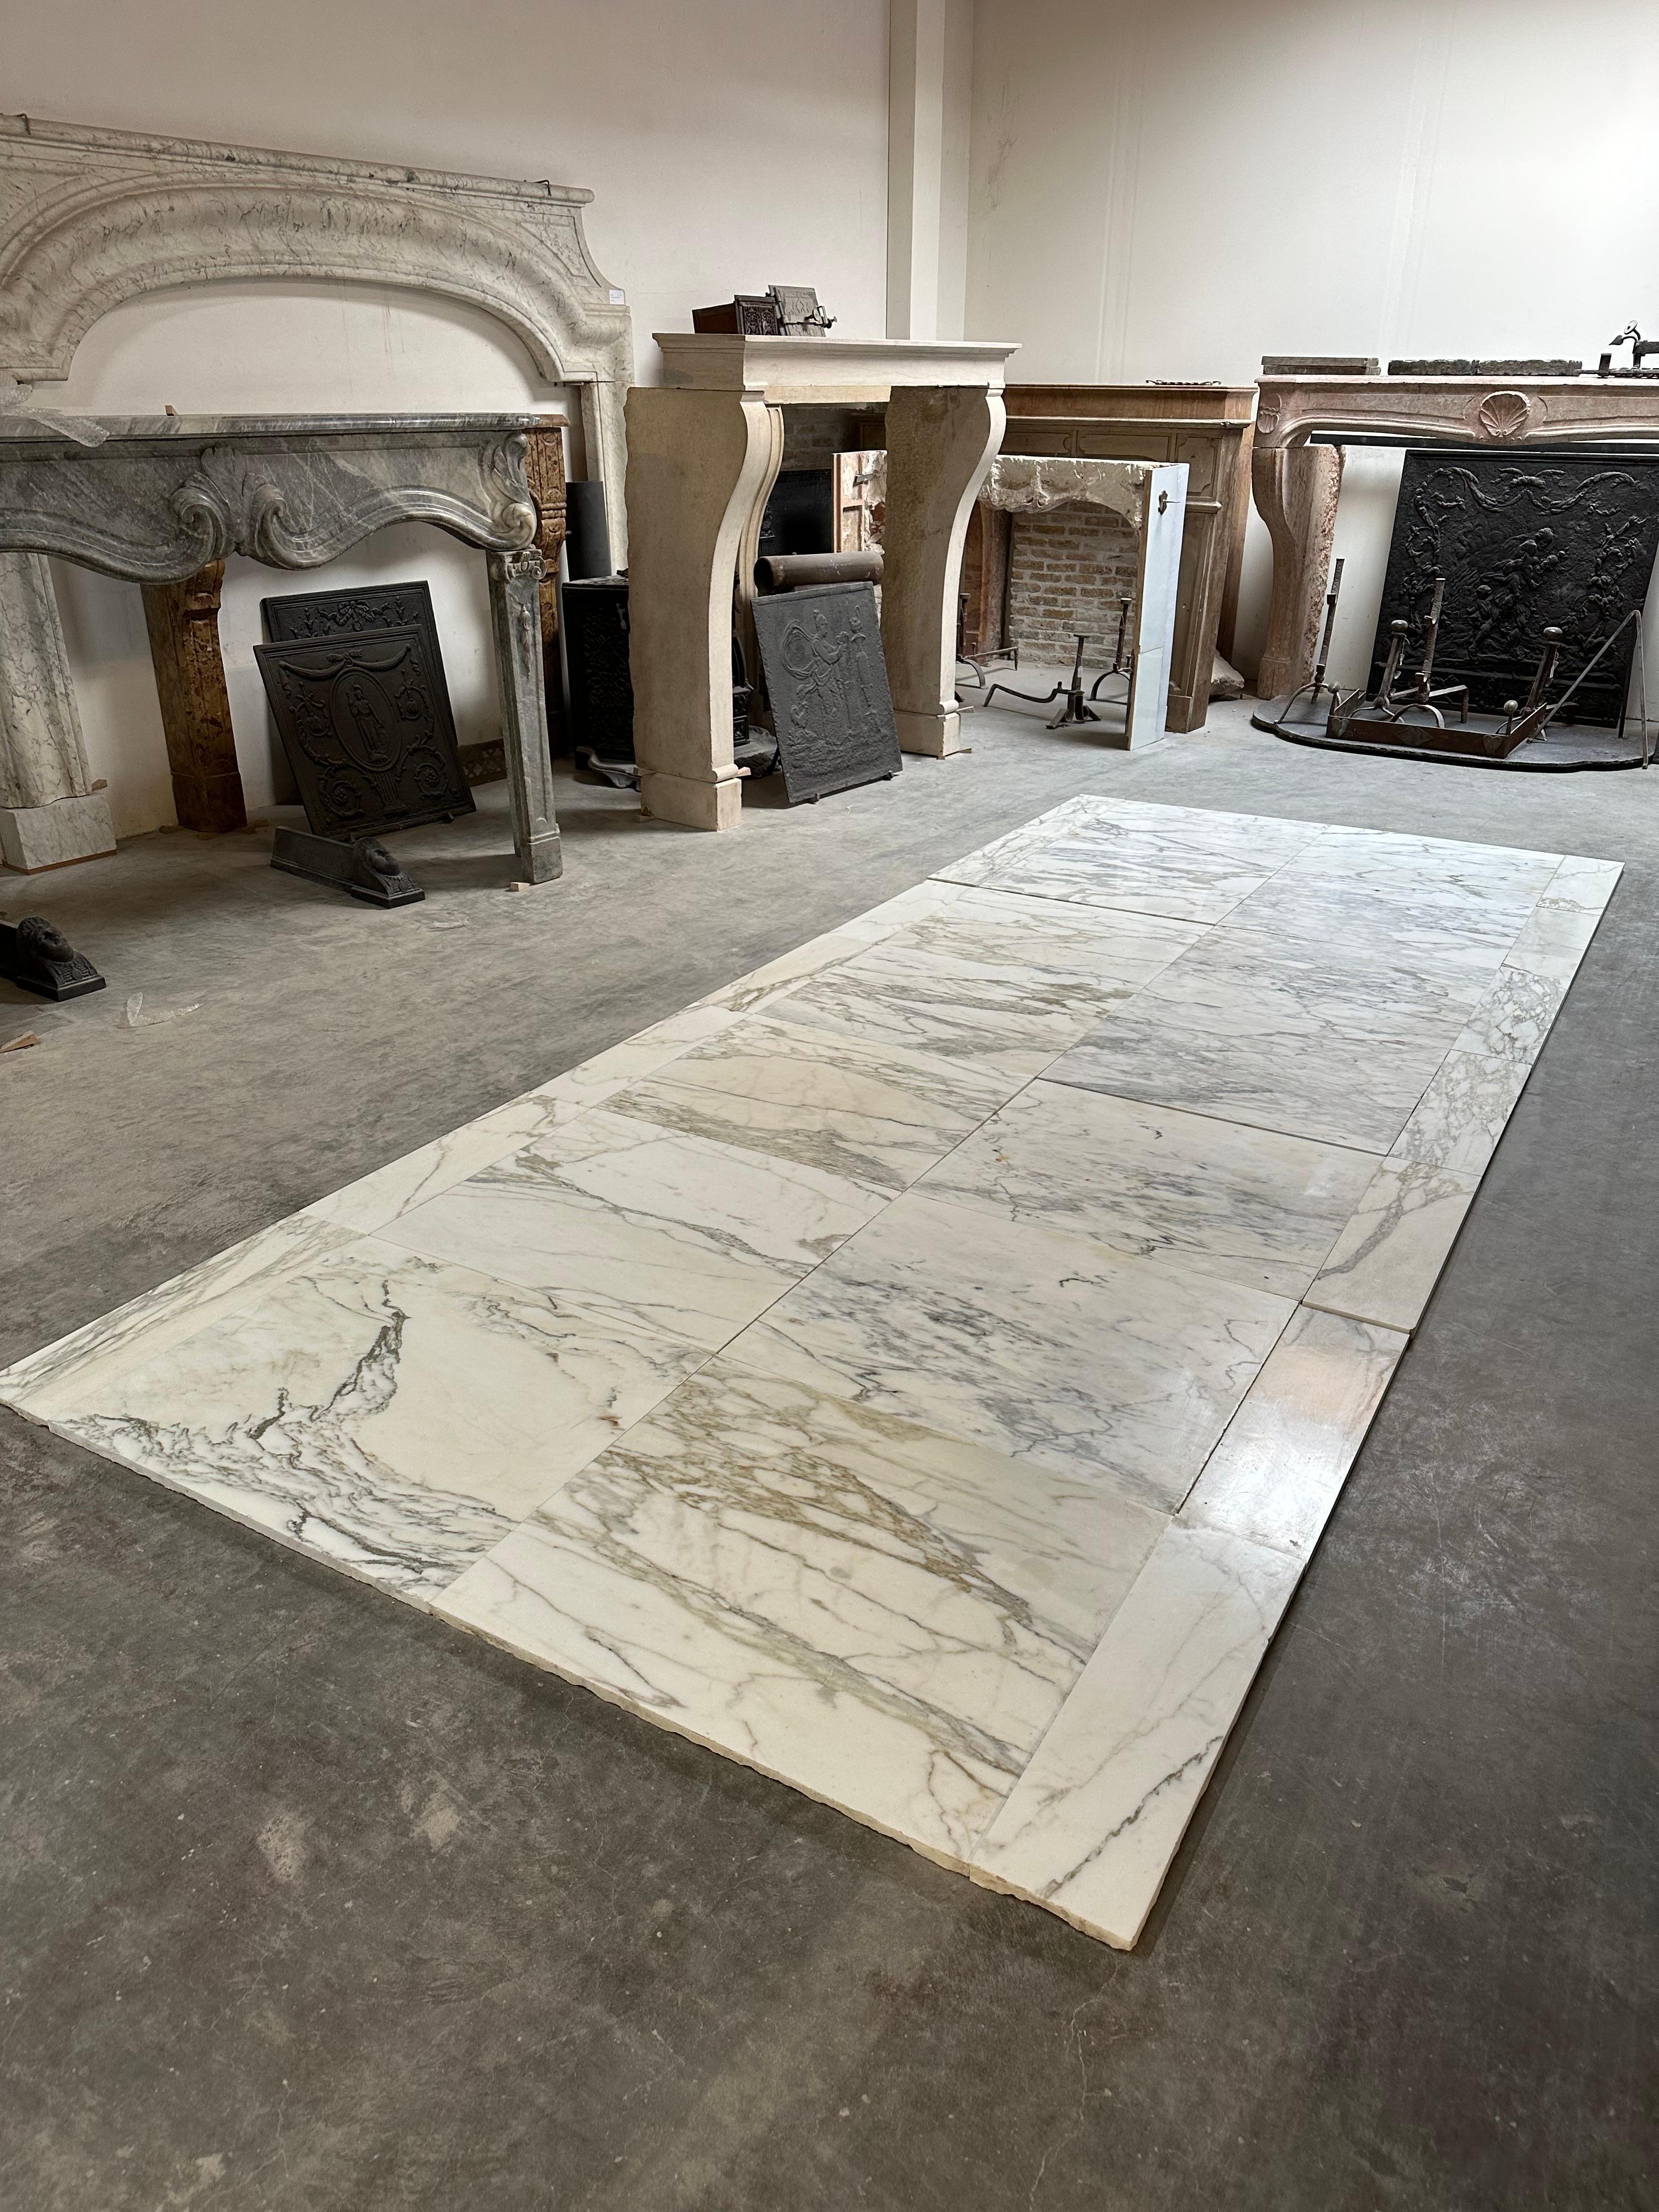 Very happy to offer this striking marble floor.
This used to be the hallway in a mid 19th century hallway in the city center of The Hague. The floor dates back to approx. 1850.

This warm Calacatta marble has an amazing soft shine and retained the